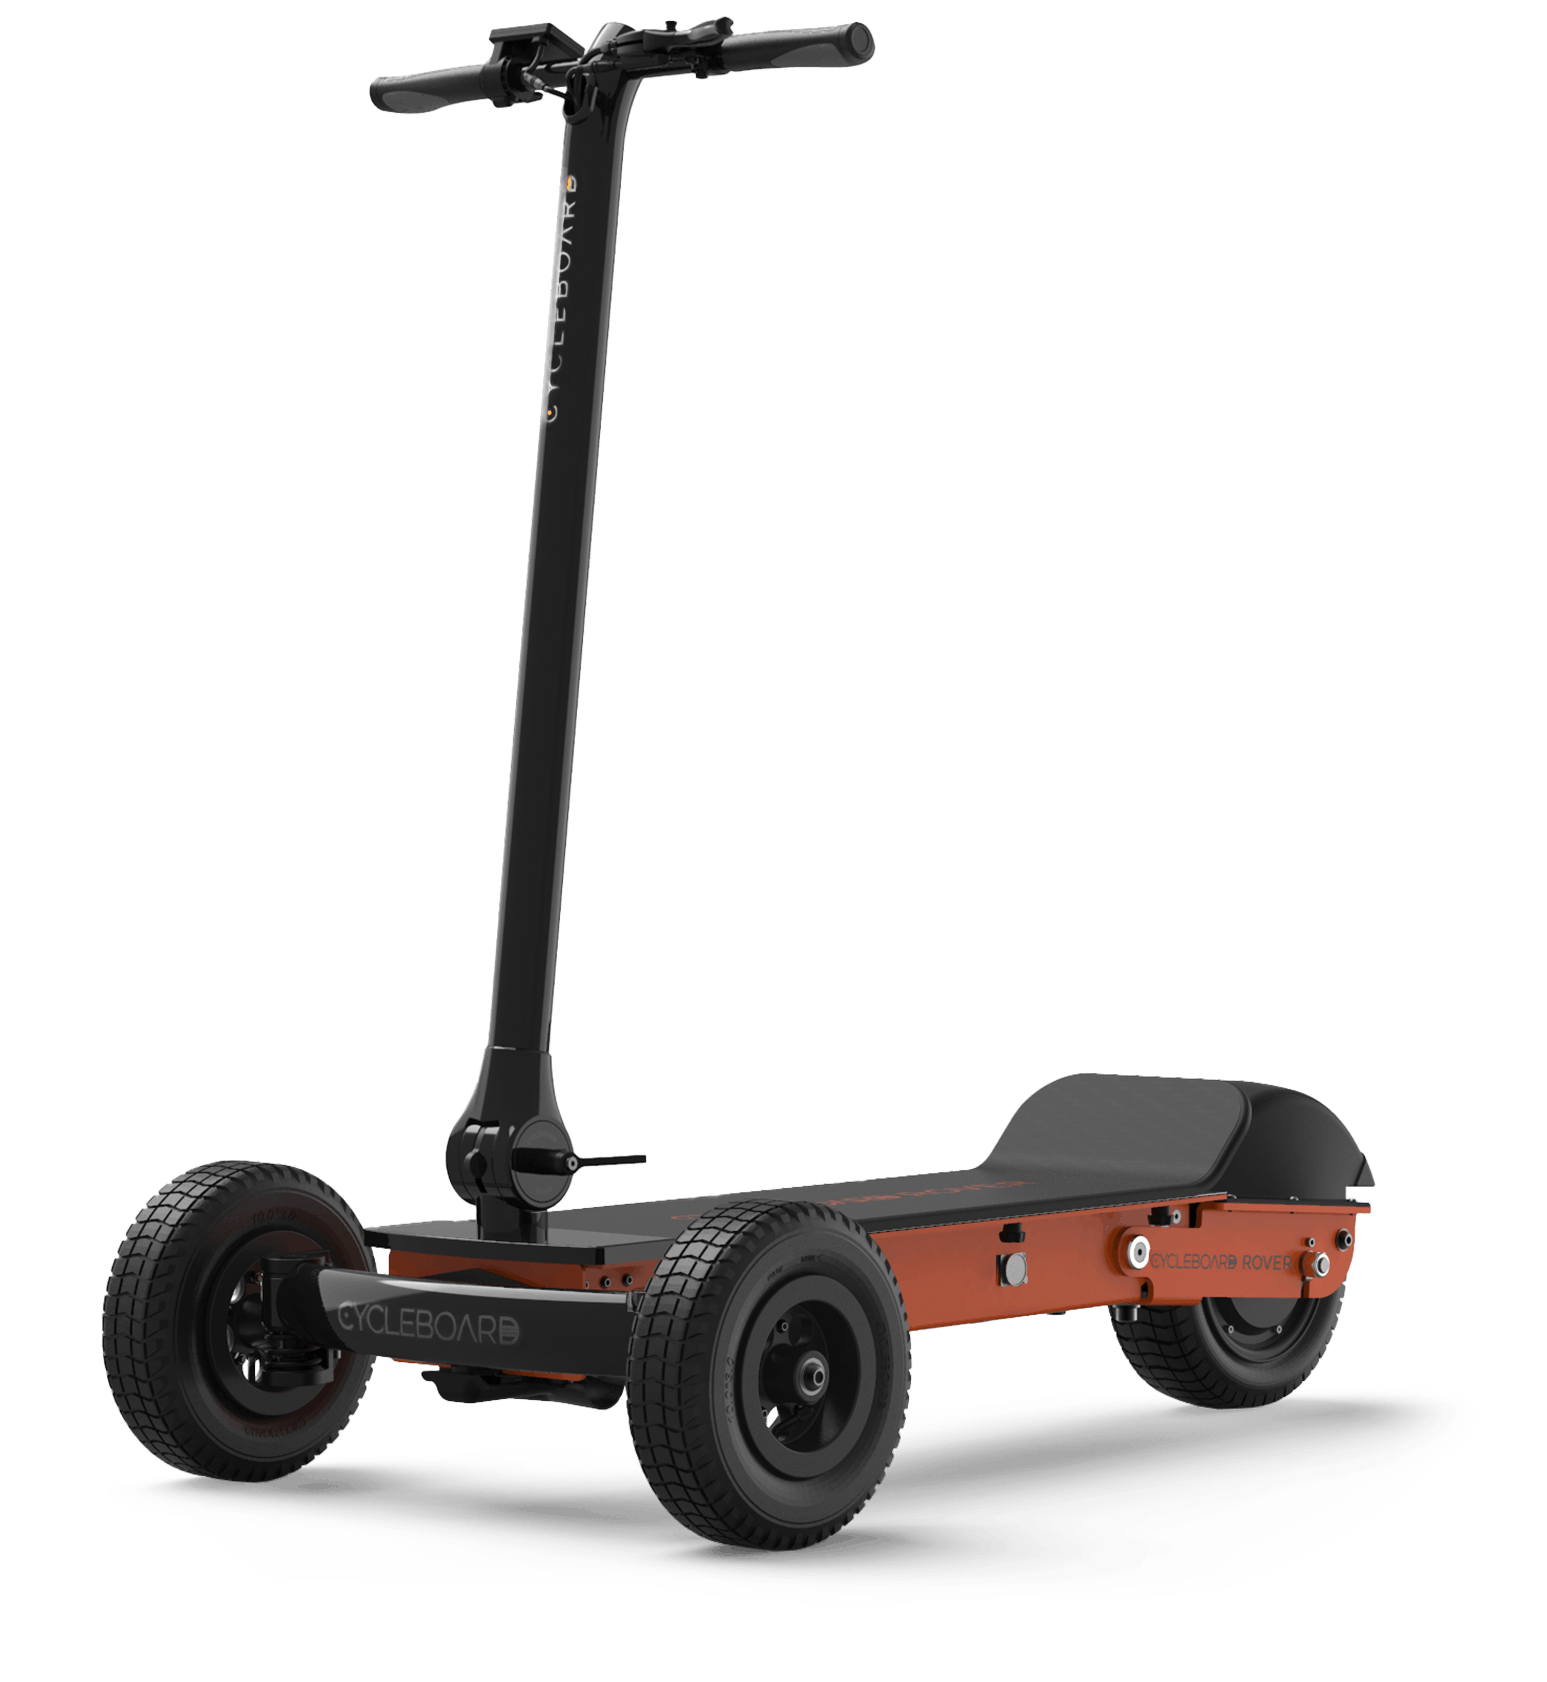 Smart Balance Wheel Electric Scooters for sale